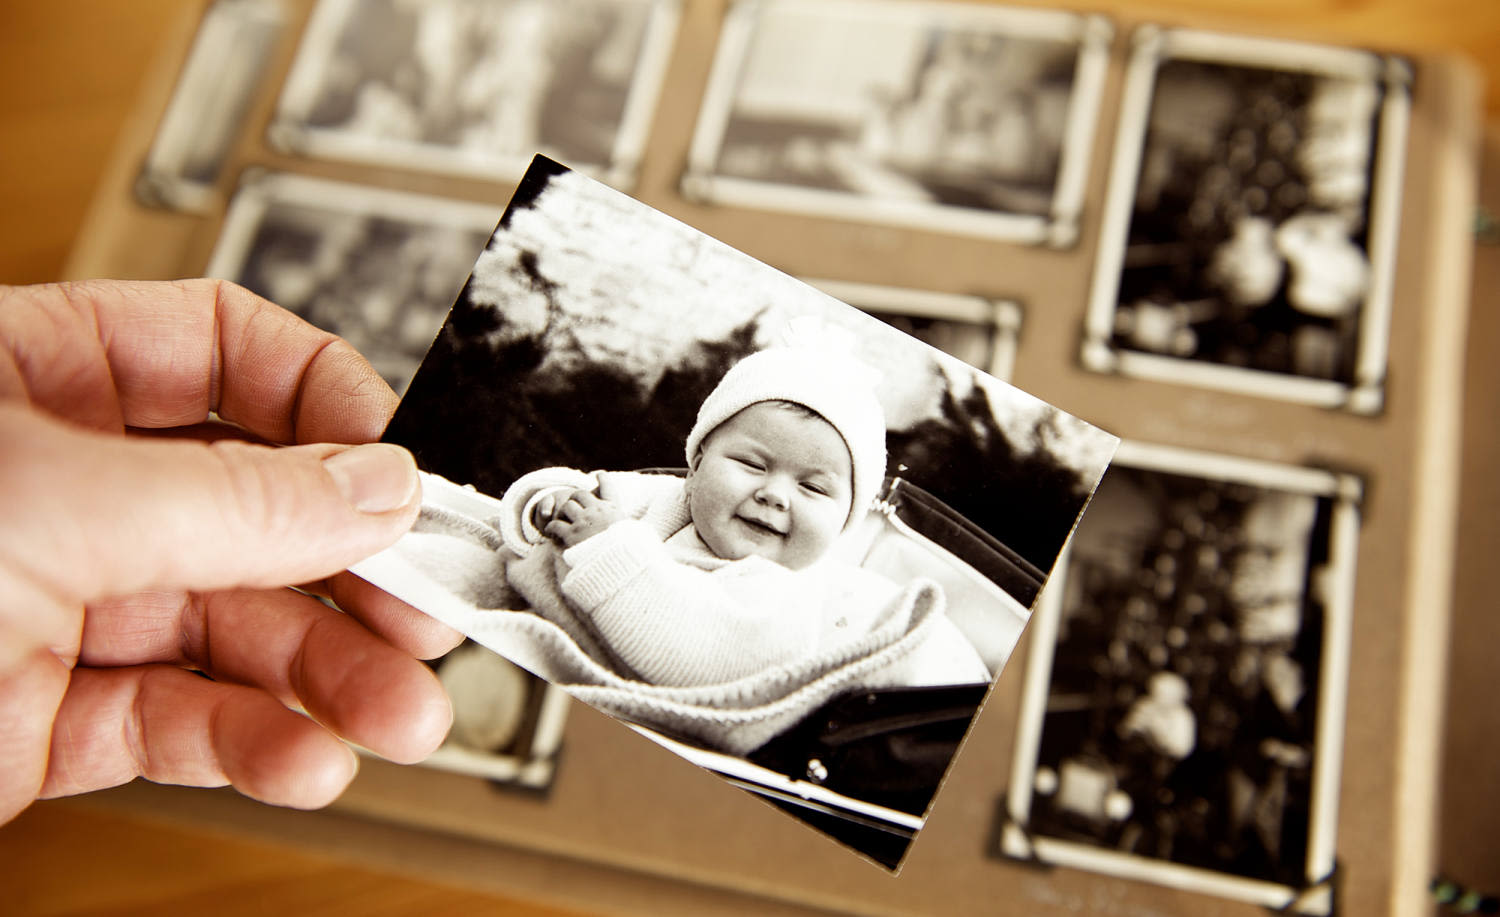 These baby names used to be popular. Why they are disappearing fast